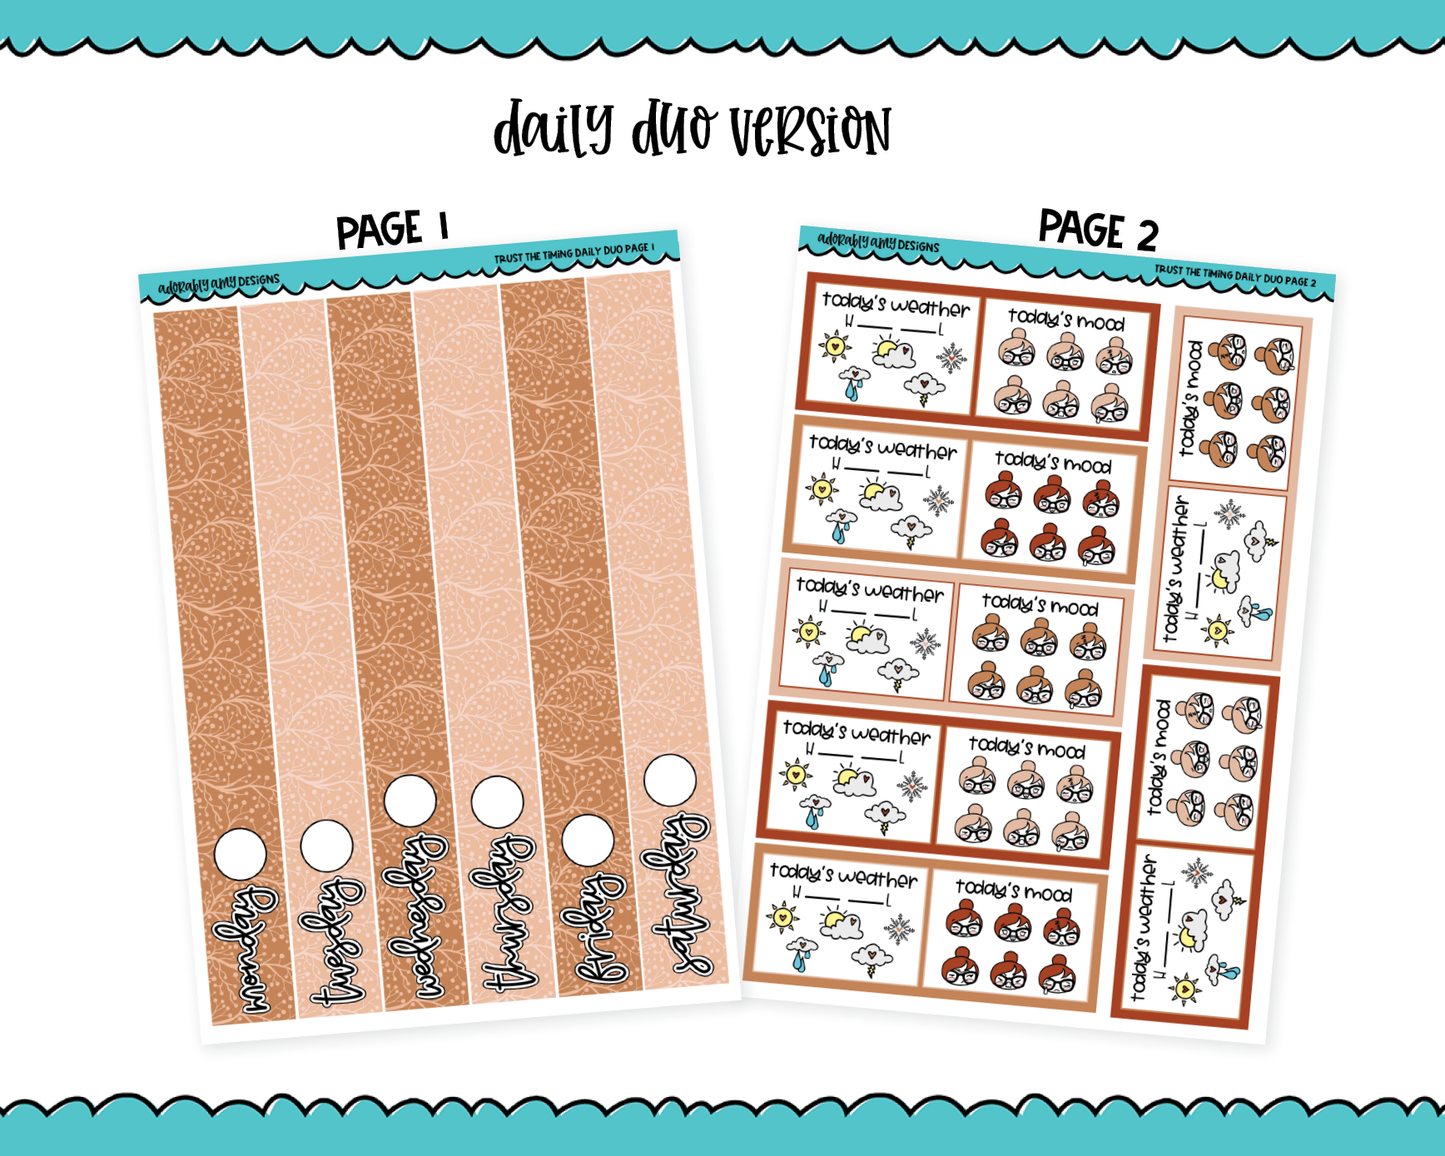 Daily Duo Trust the Timing Themed Weekly Planner Sticker Kit for Daily Duo Planner